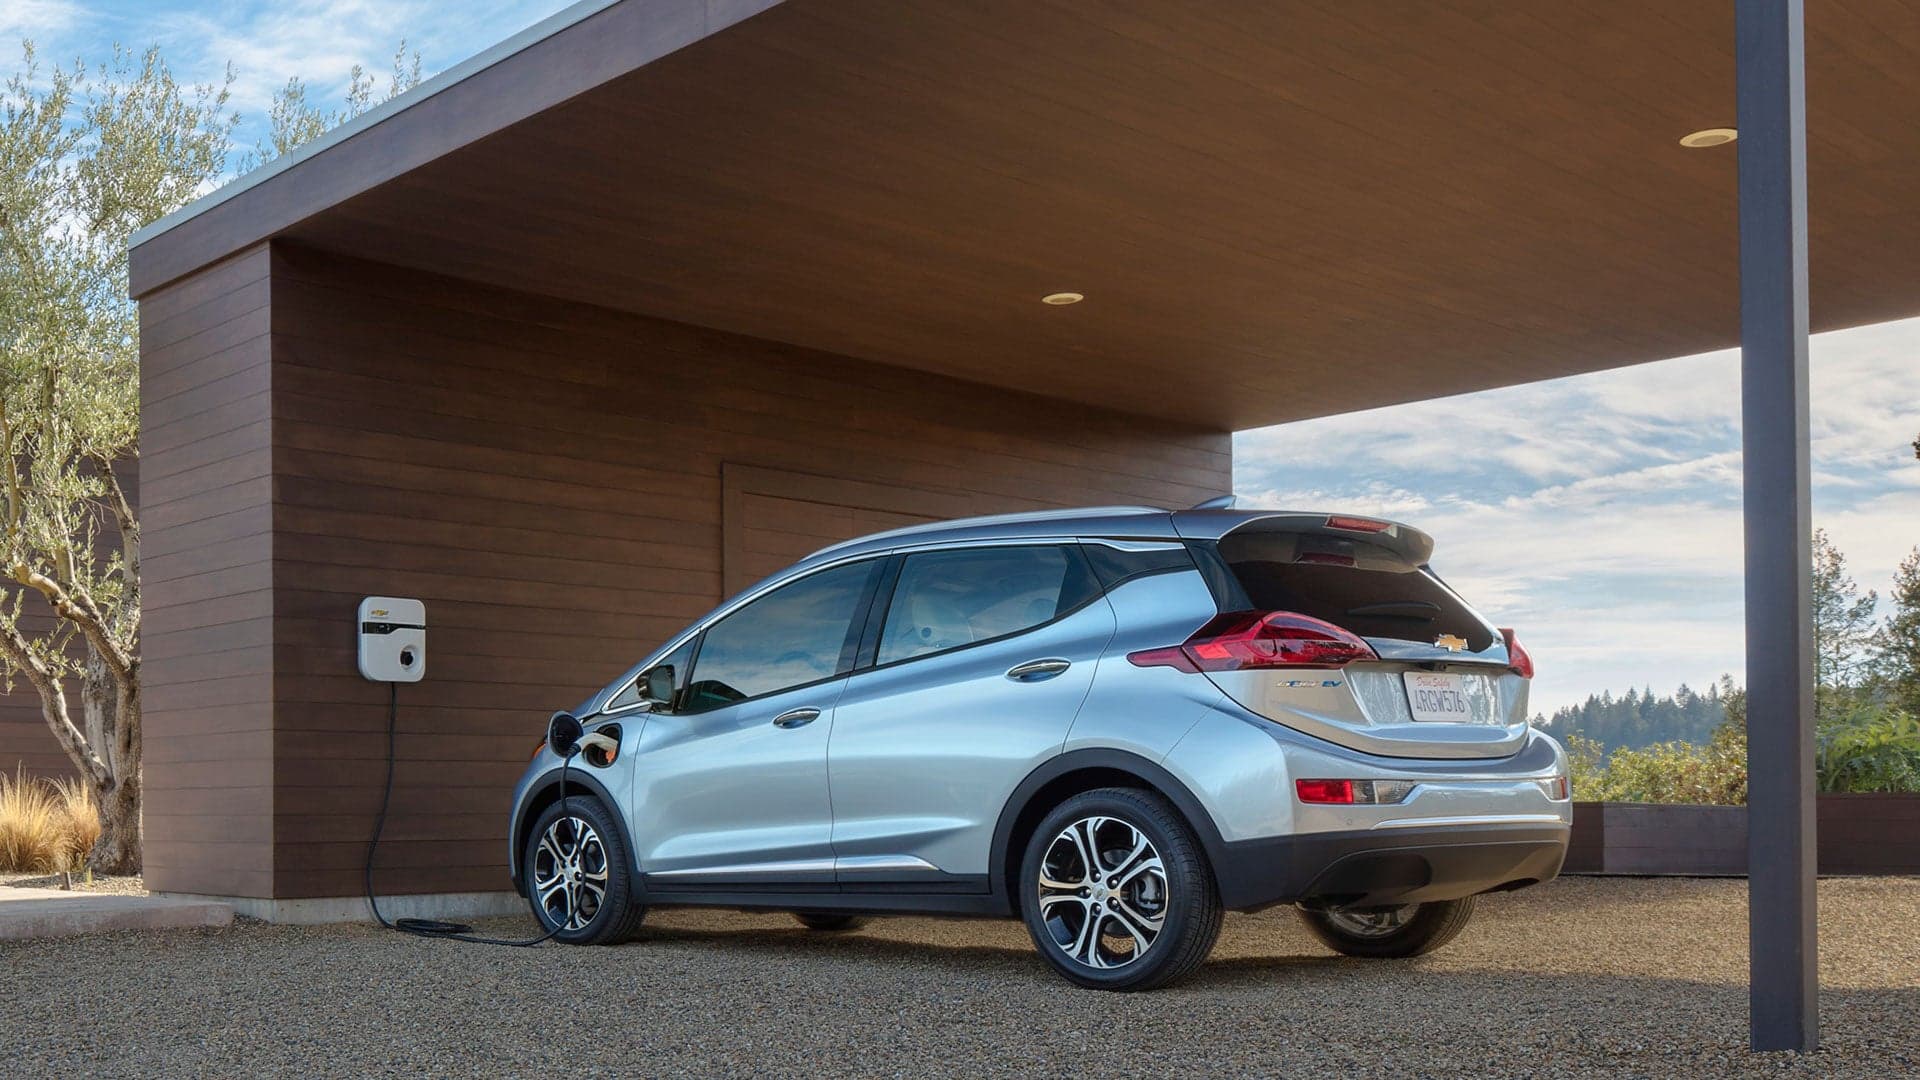 Chevrolet Bolt May Be the EV to Conquer America